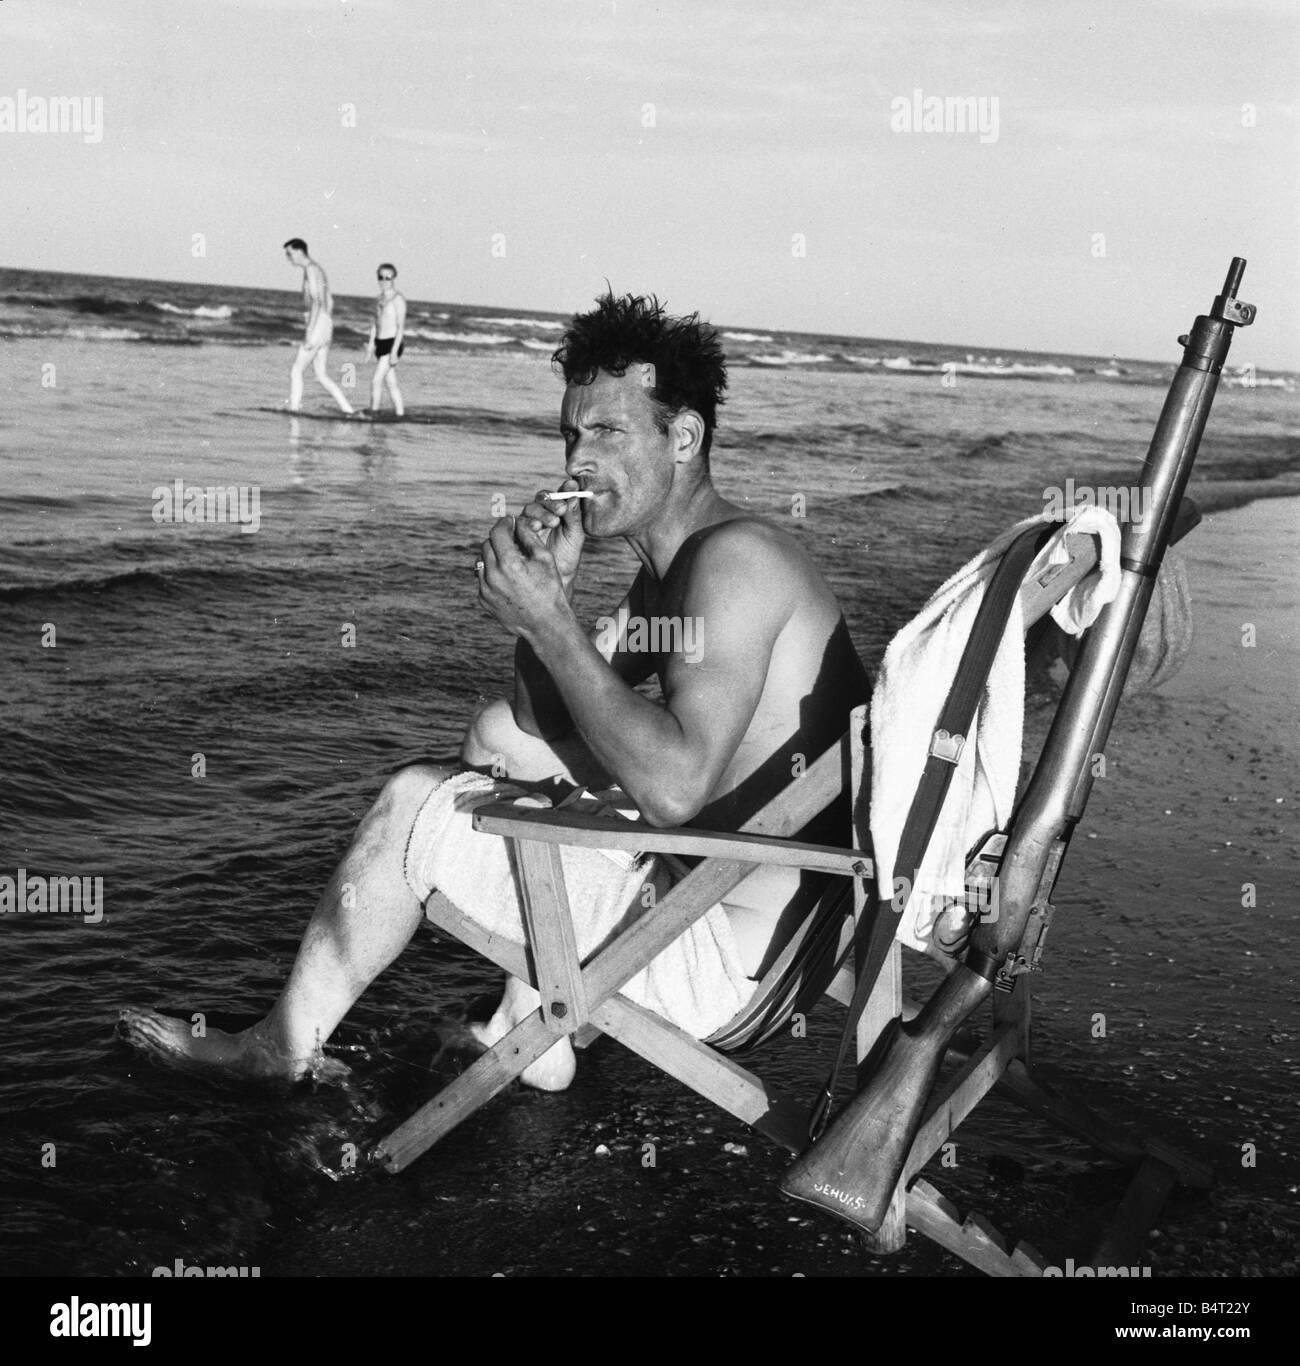 Suez Crisis 1956 Norman Donald of the Pioneer Corps relaxes with a cigarette on the beach near Gamil Stock Photo